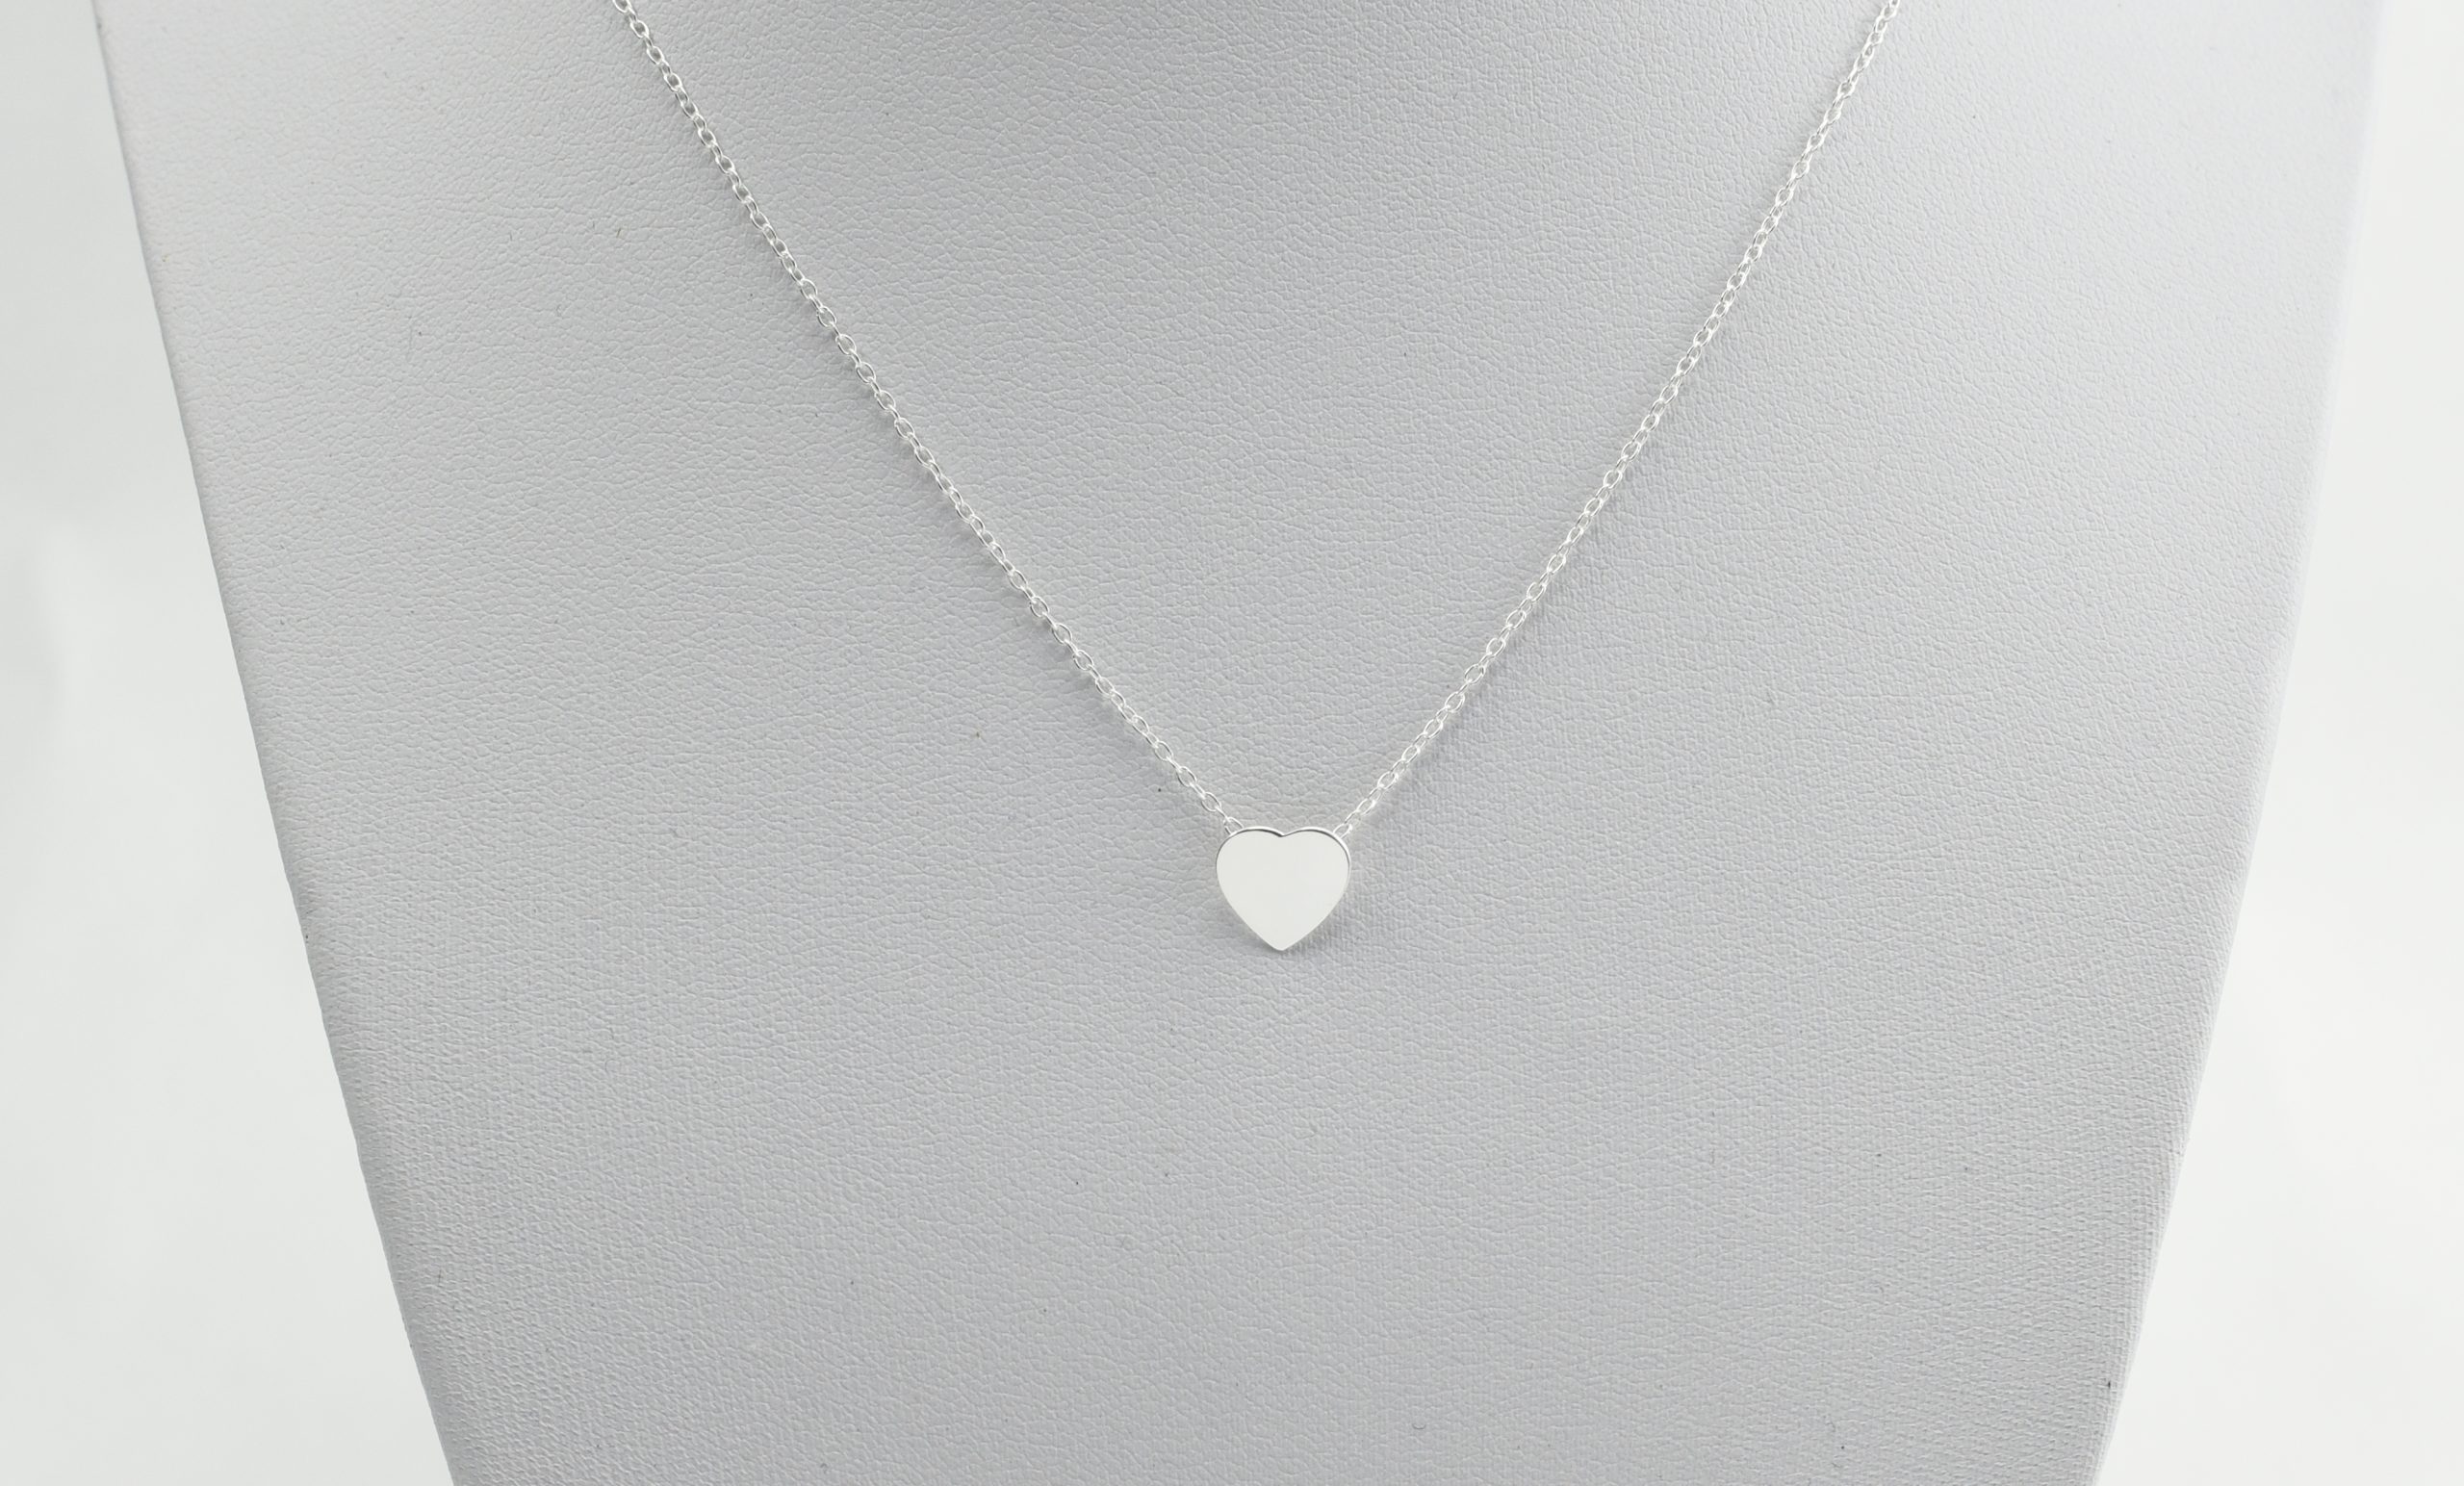 Silver Dainty Heart Charm Silver Necklace, Sterling Silver Pendant